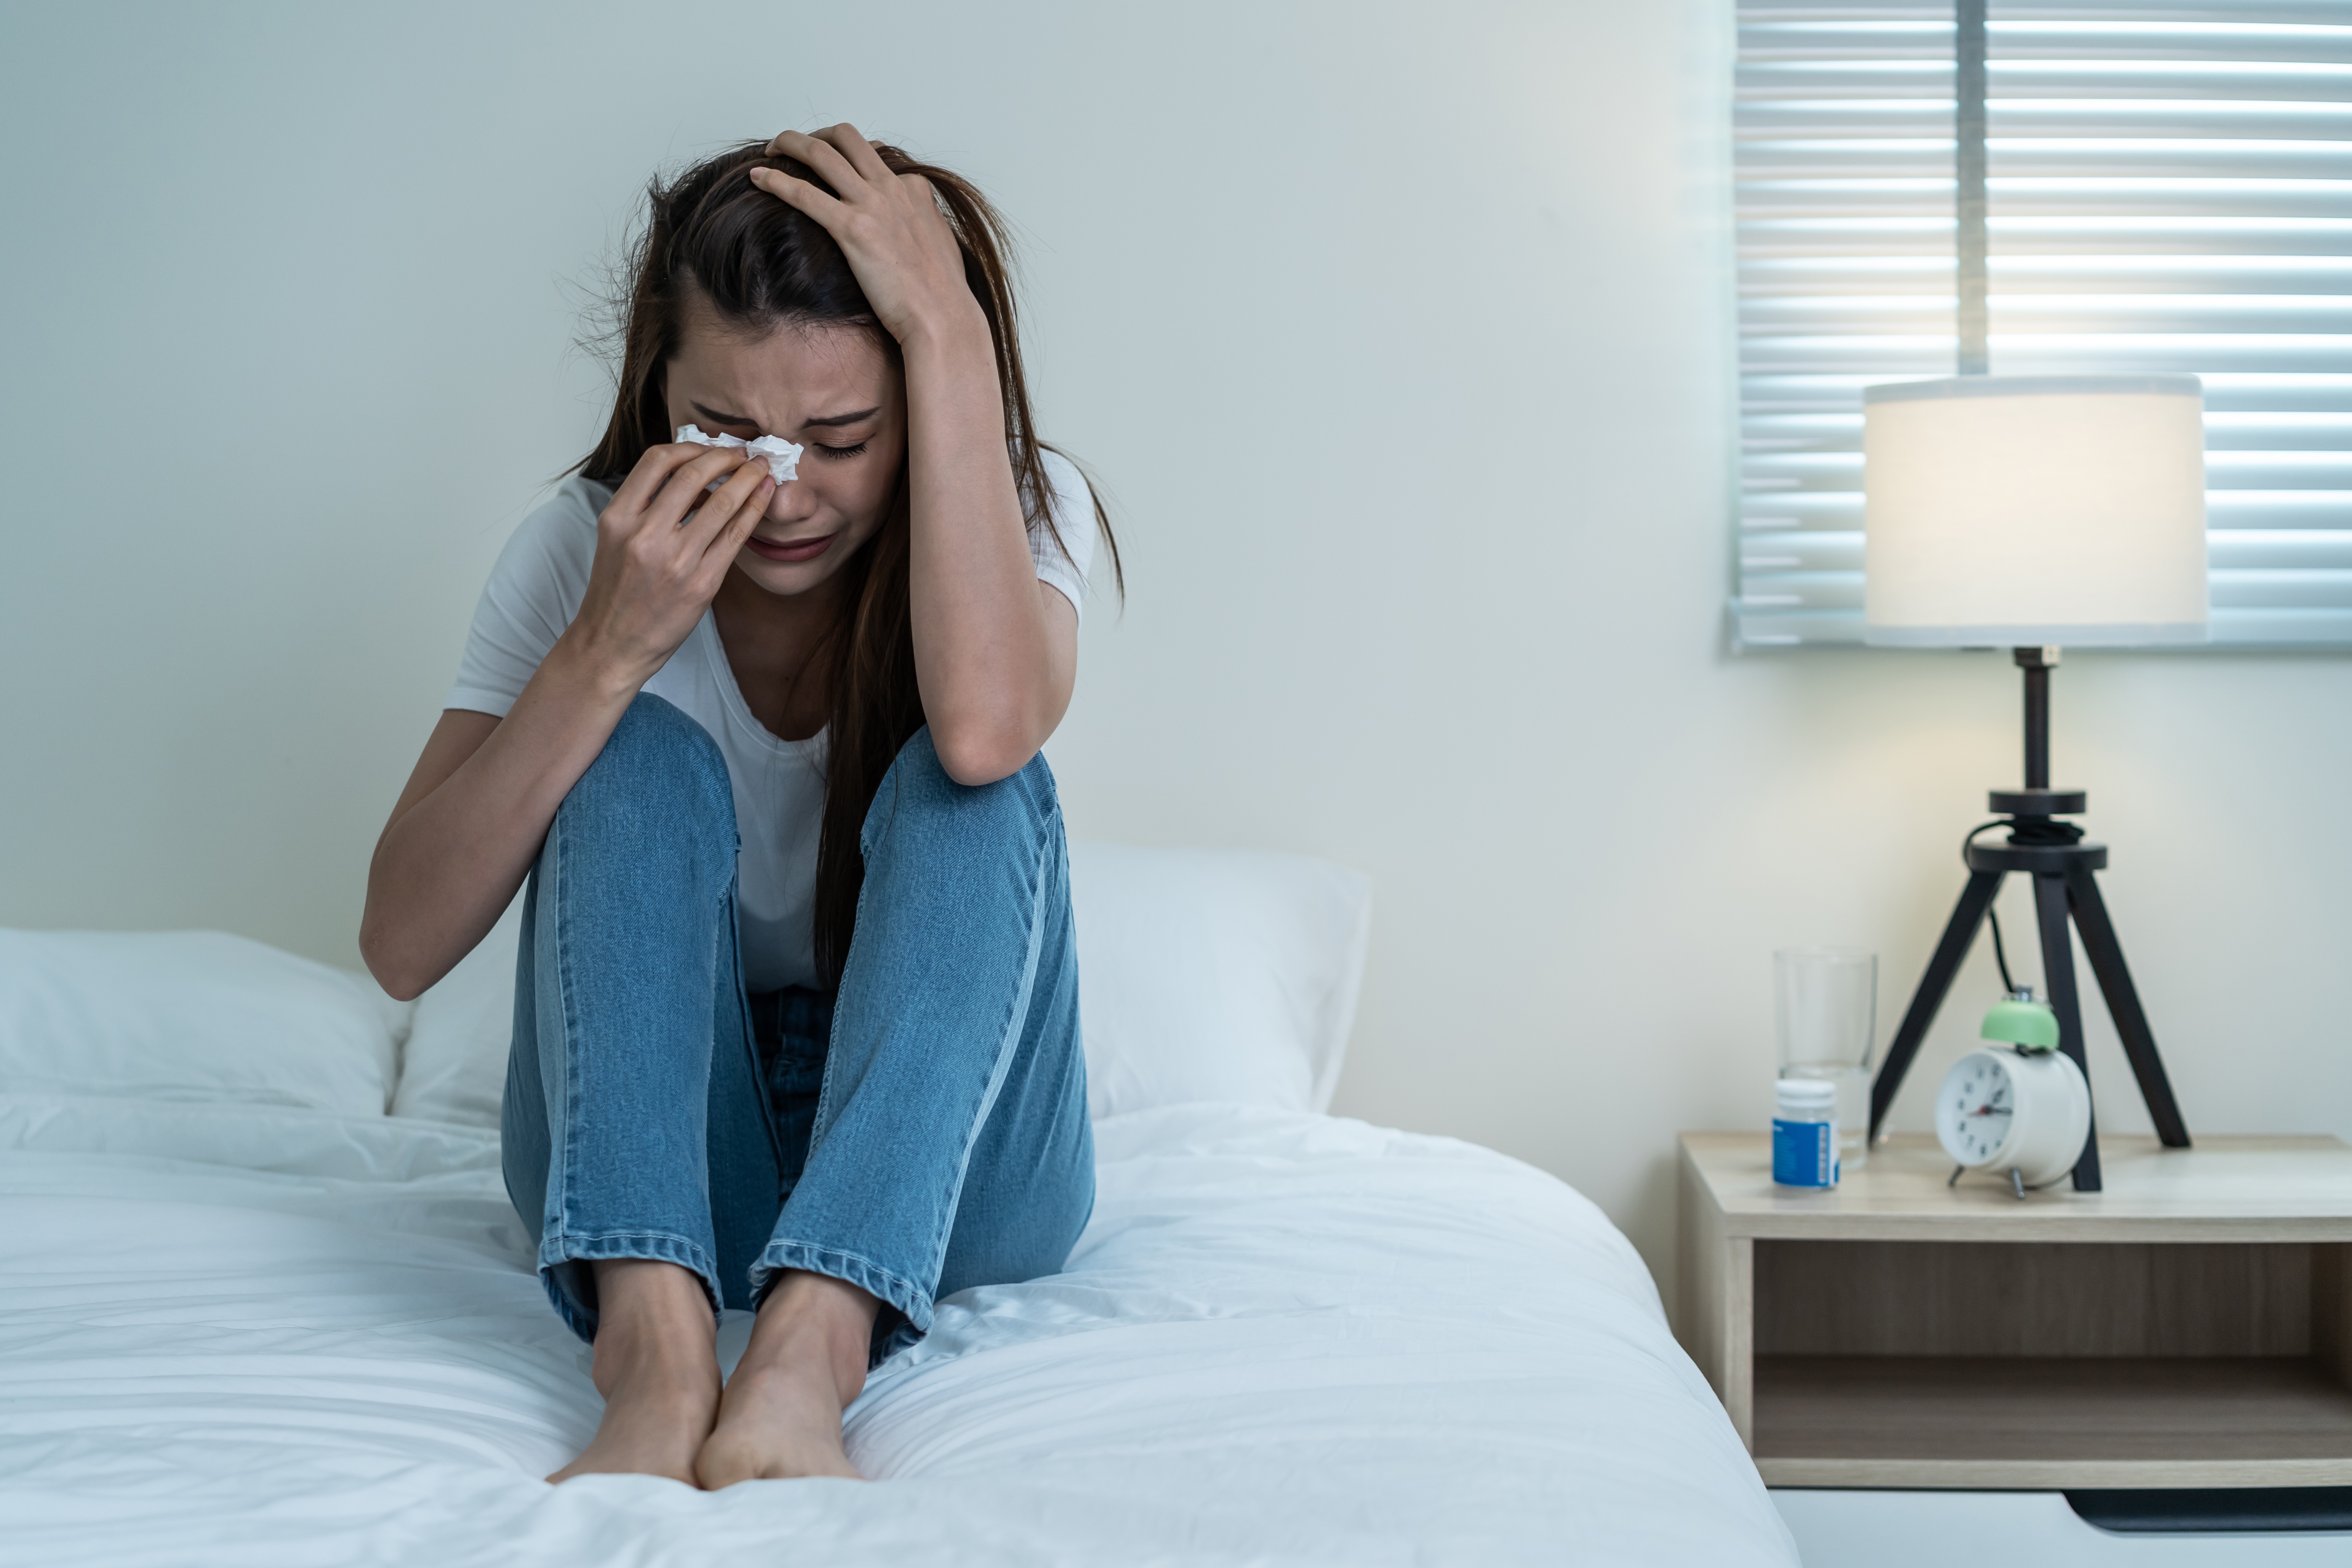 A woman crying alone on her bed | Source: Shutterstock